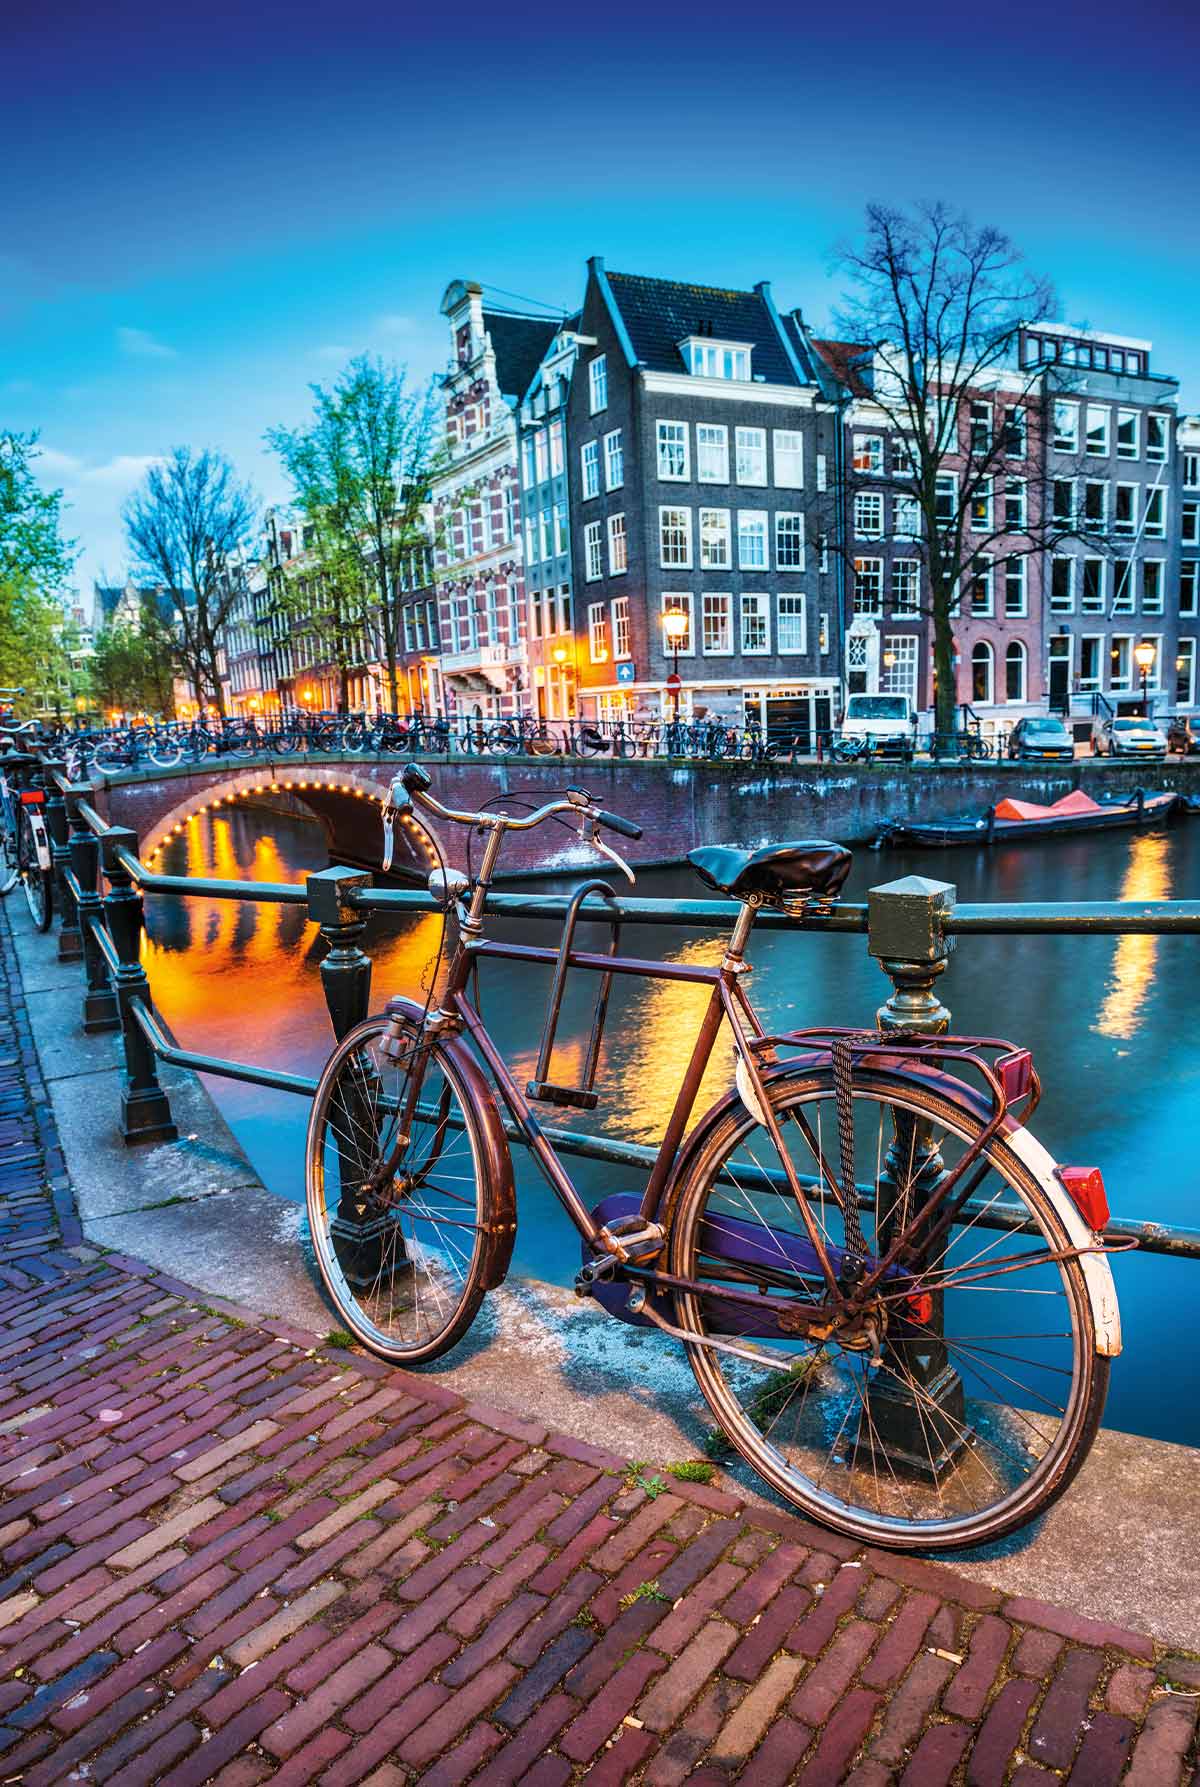 A bicycle in downtown Amsterdam, Netherlands